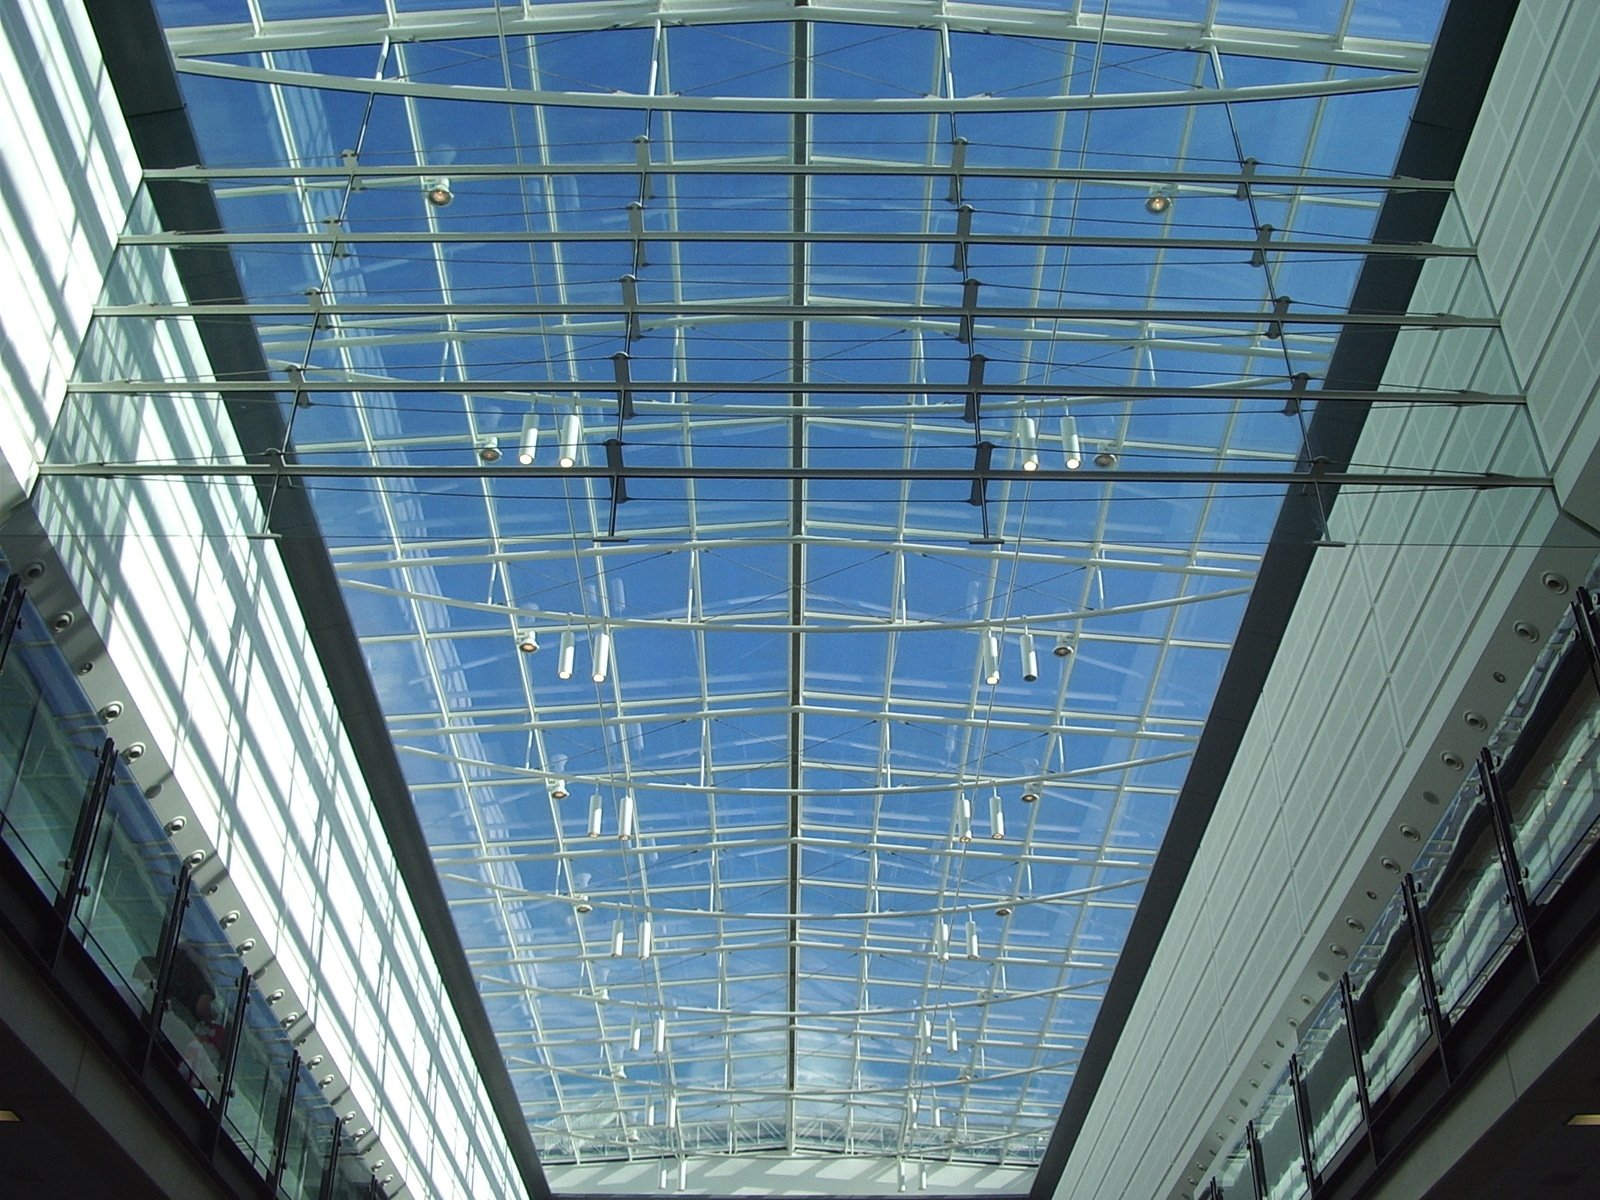 an enclosed area is shown, showing the skylight and metal rods in a glass building